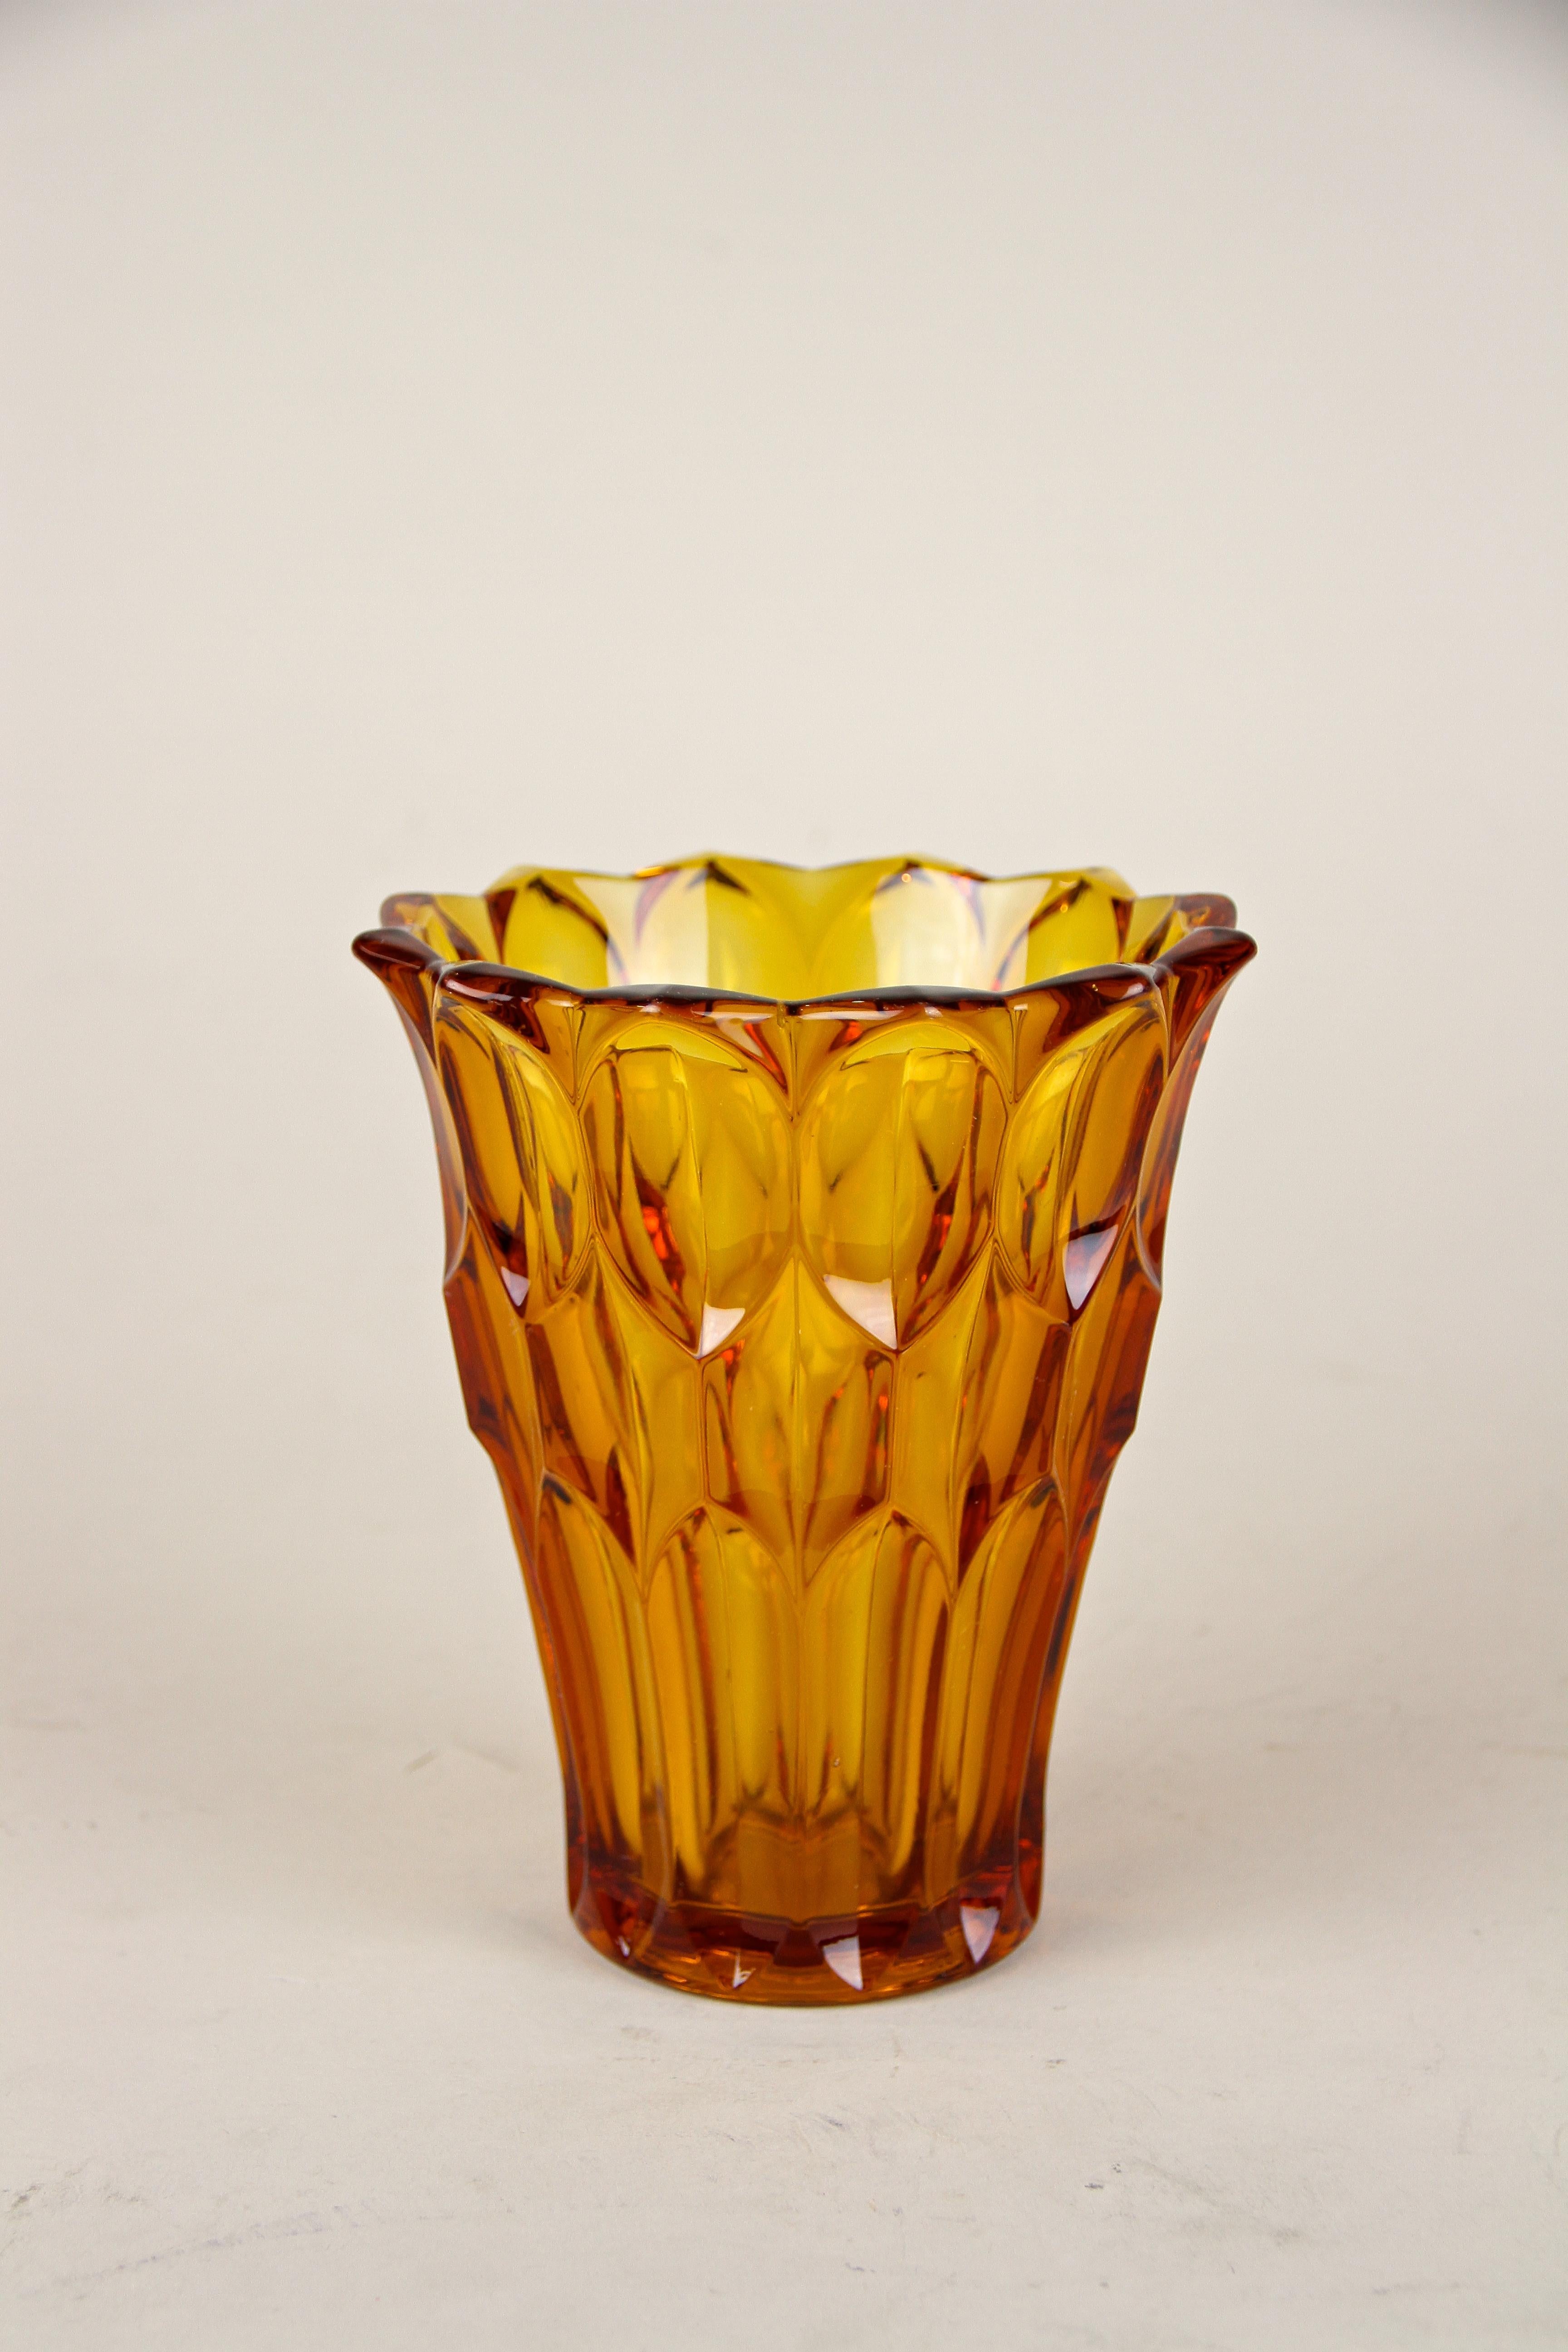 Delicate 20th century glass vase from the Art Deco period, circa 1920 in Austria. The lovely vase knows how to convince, a great designed piece of glass, adorned by a special cut which builds fantastic pattern depending on the incidence of light. A